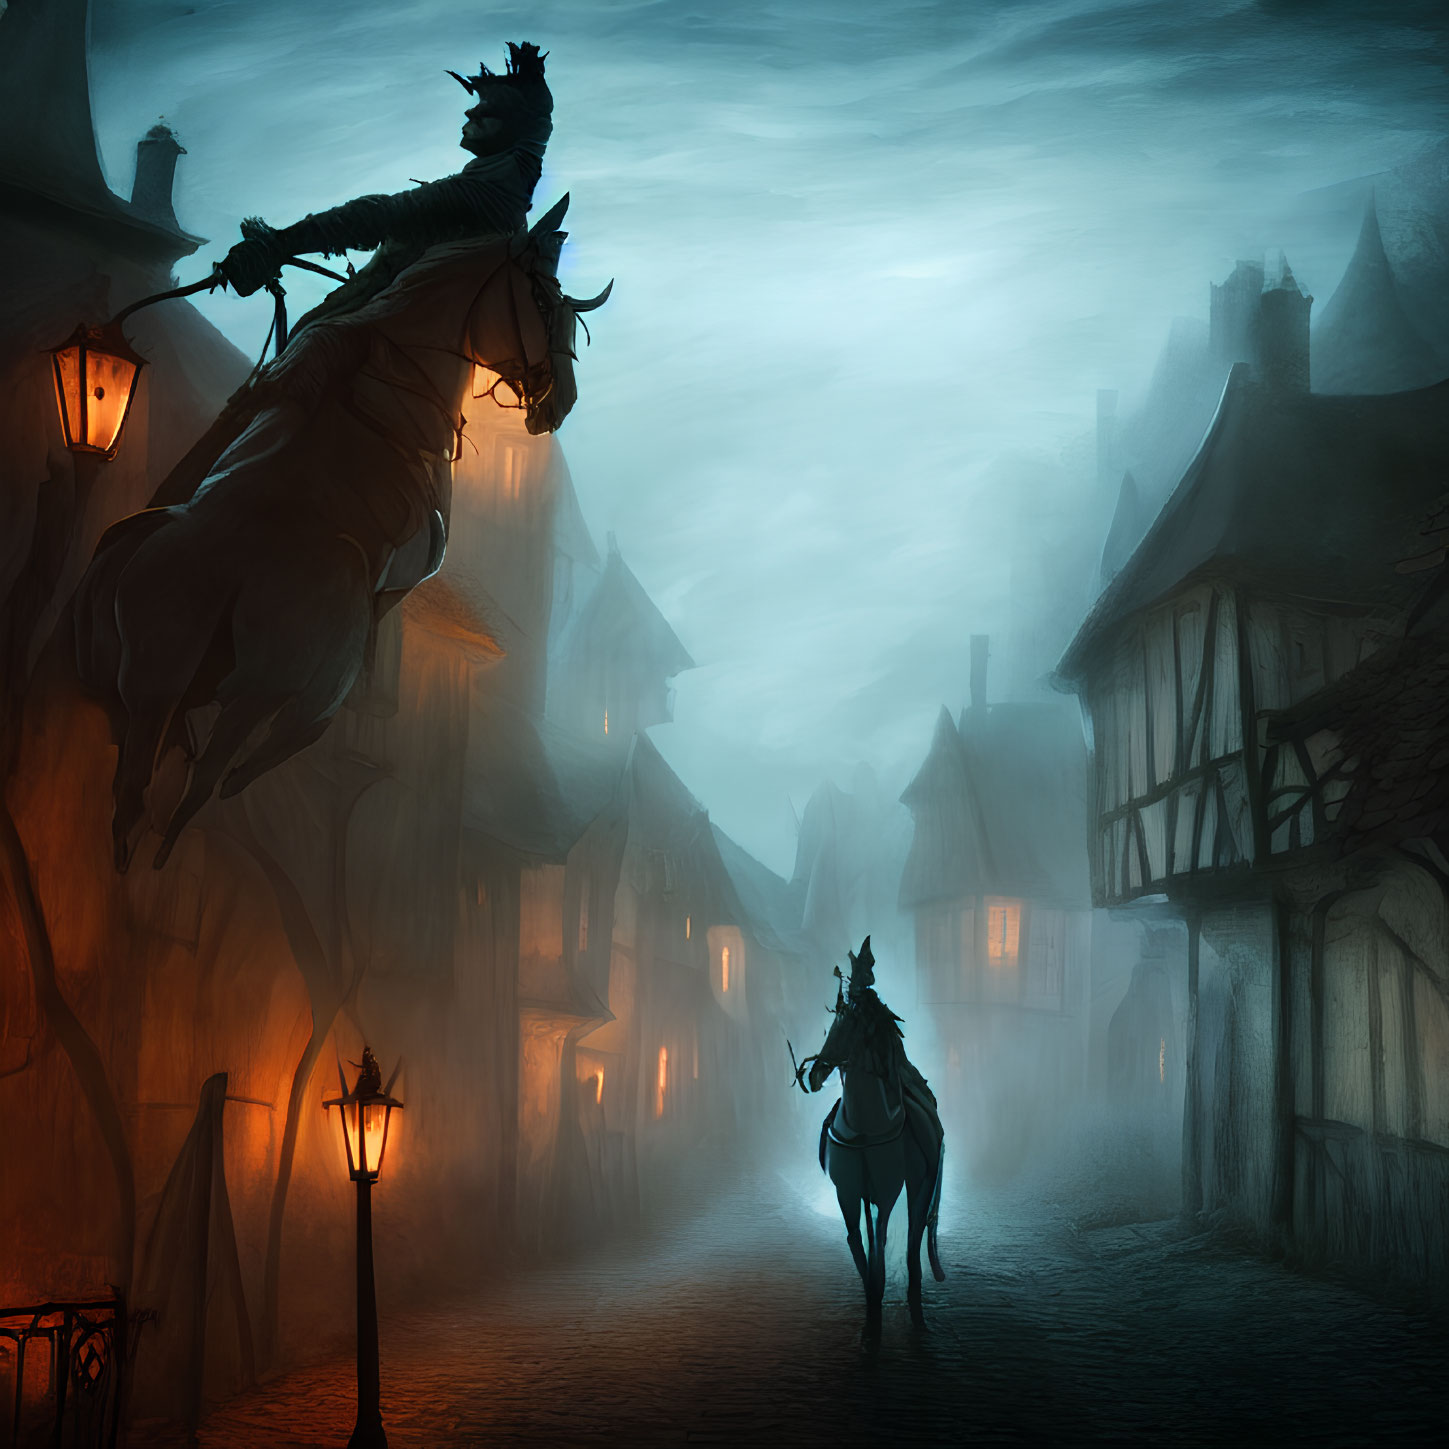 Ghostly Figure on Rearing Horse in Misty Medieval Village with Shadowy Rider and Lantern-lit